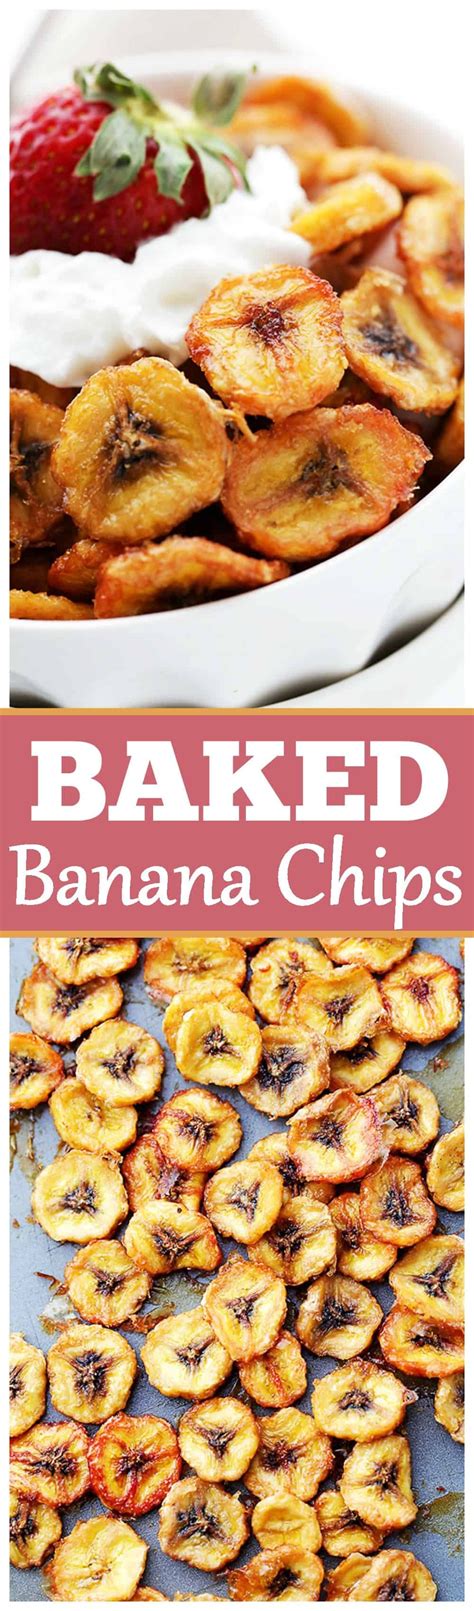 Homemade Baked Banana Chips Deliciously Sweet And Guilt Free Baked